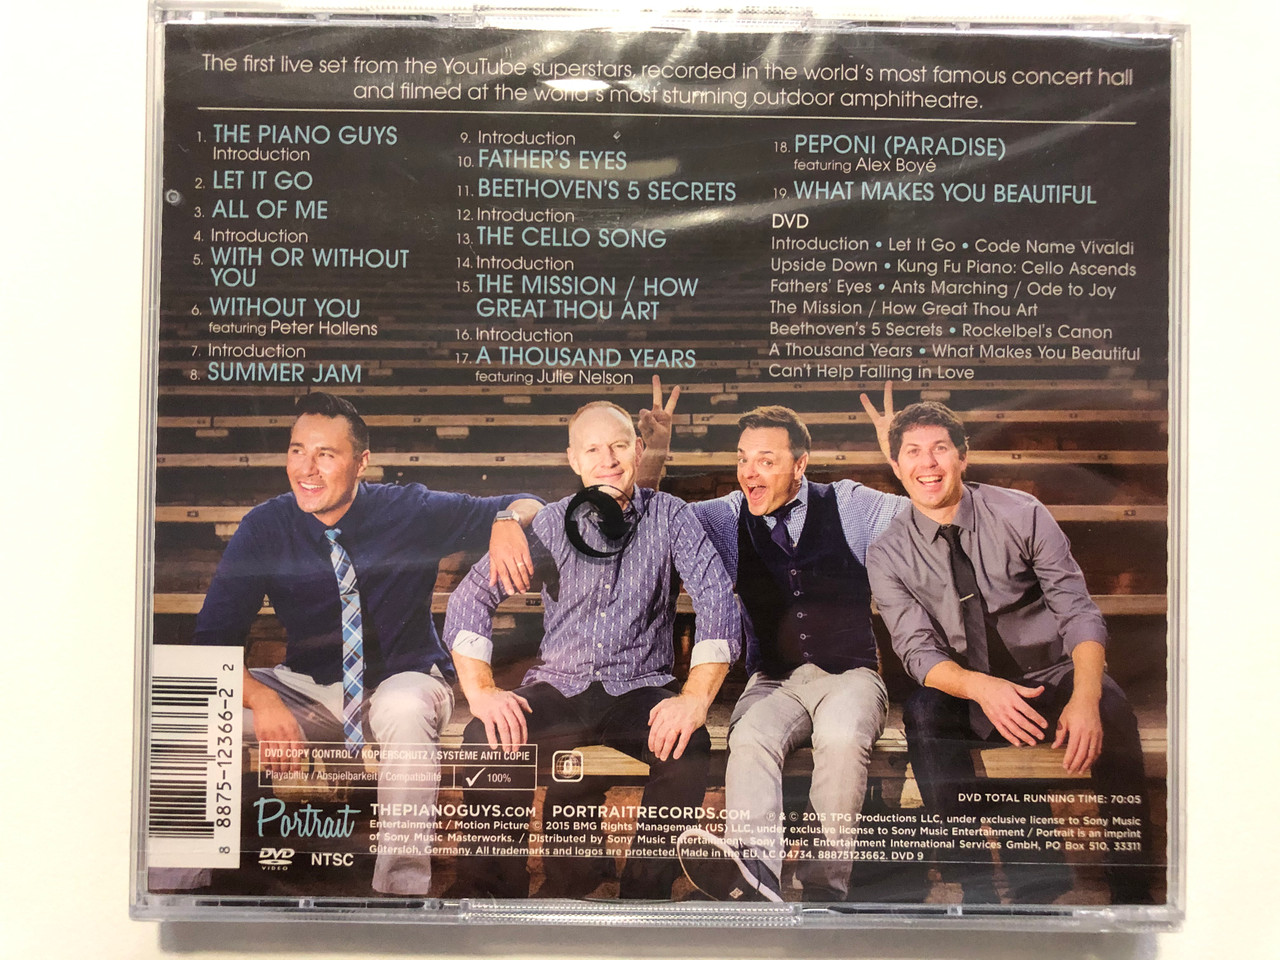 https://cdn10.bigcommerce.com/s-62bdpkt7pb/products/29470/images/175688/The_Piano_Guys_Live_Carnegie_Hall_Audio_Red_Rocks_Concert_Video_Deluxe_Edition_The_First_Live_CD_DVD_set_from_the_YouTube_Superstar_Portrait_Audio_CD_DVD_2015_88875123662_2__26351.1618907809.1280.1280.JPG?c=2&_ga=2.223542302.425983966.1618922532-1242530367.1618922532